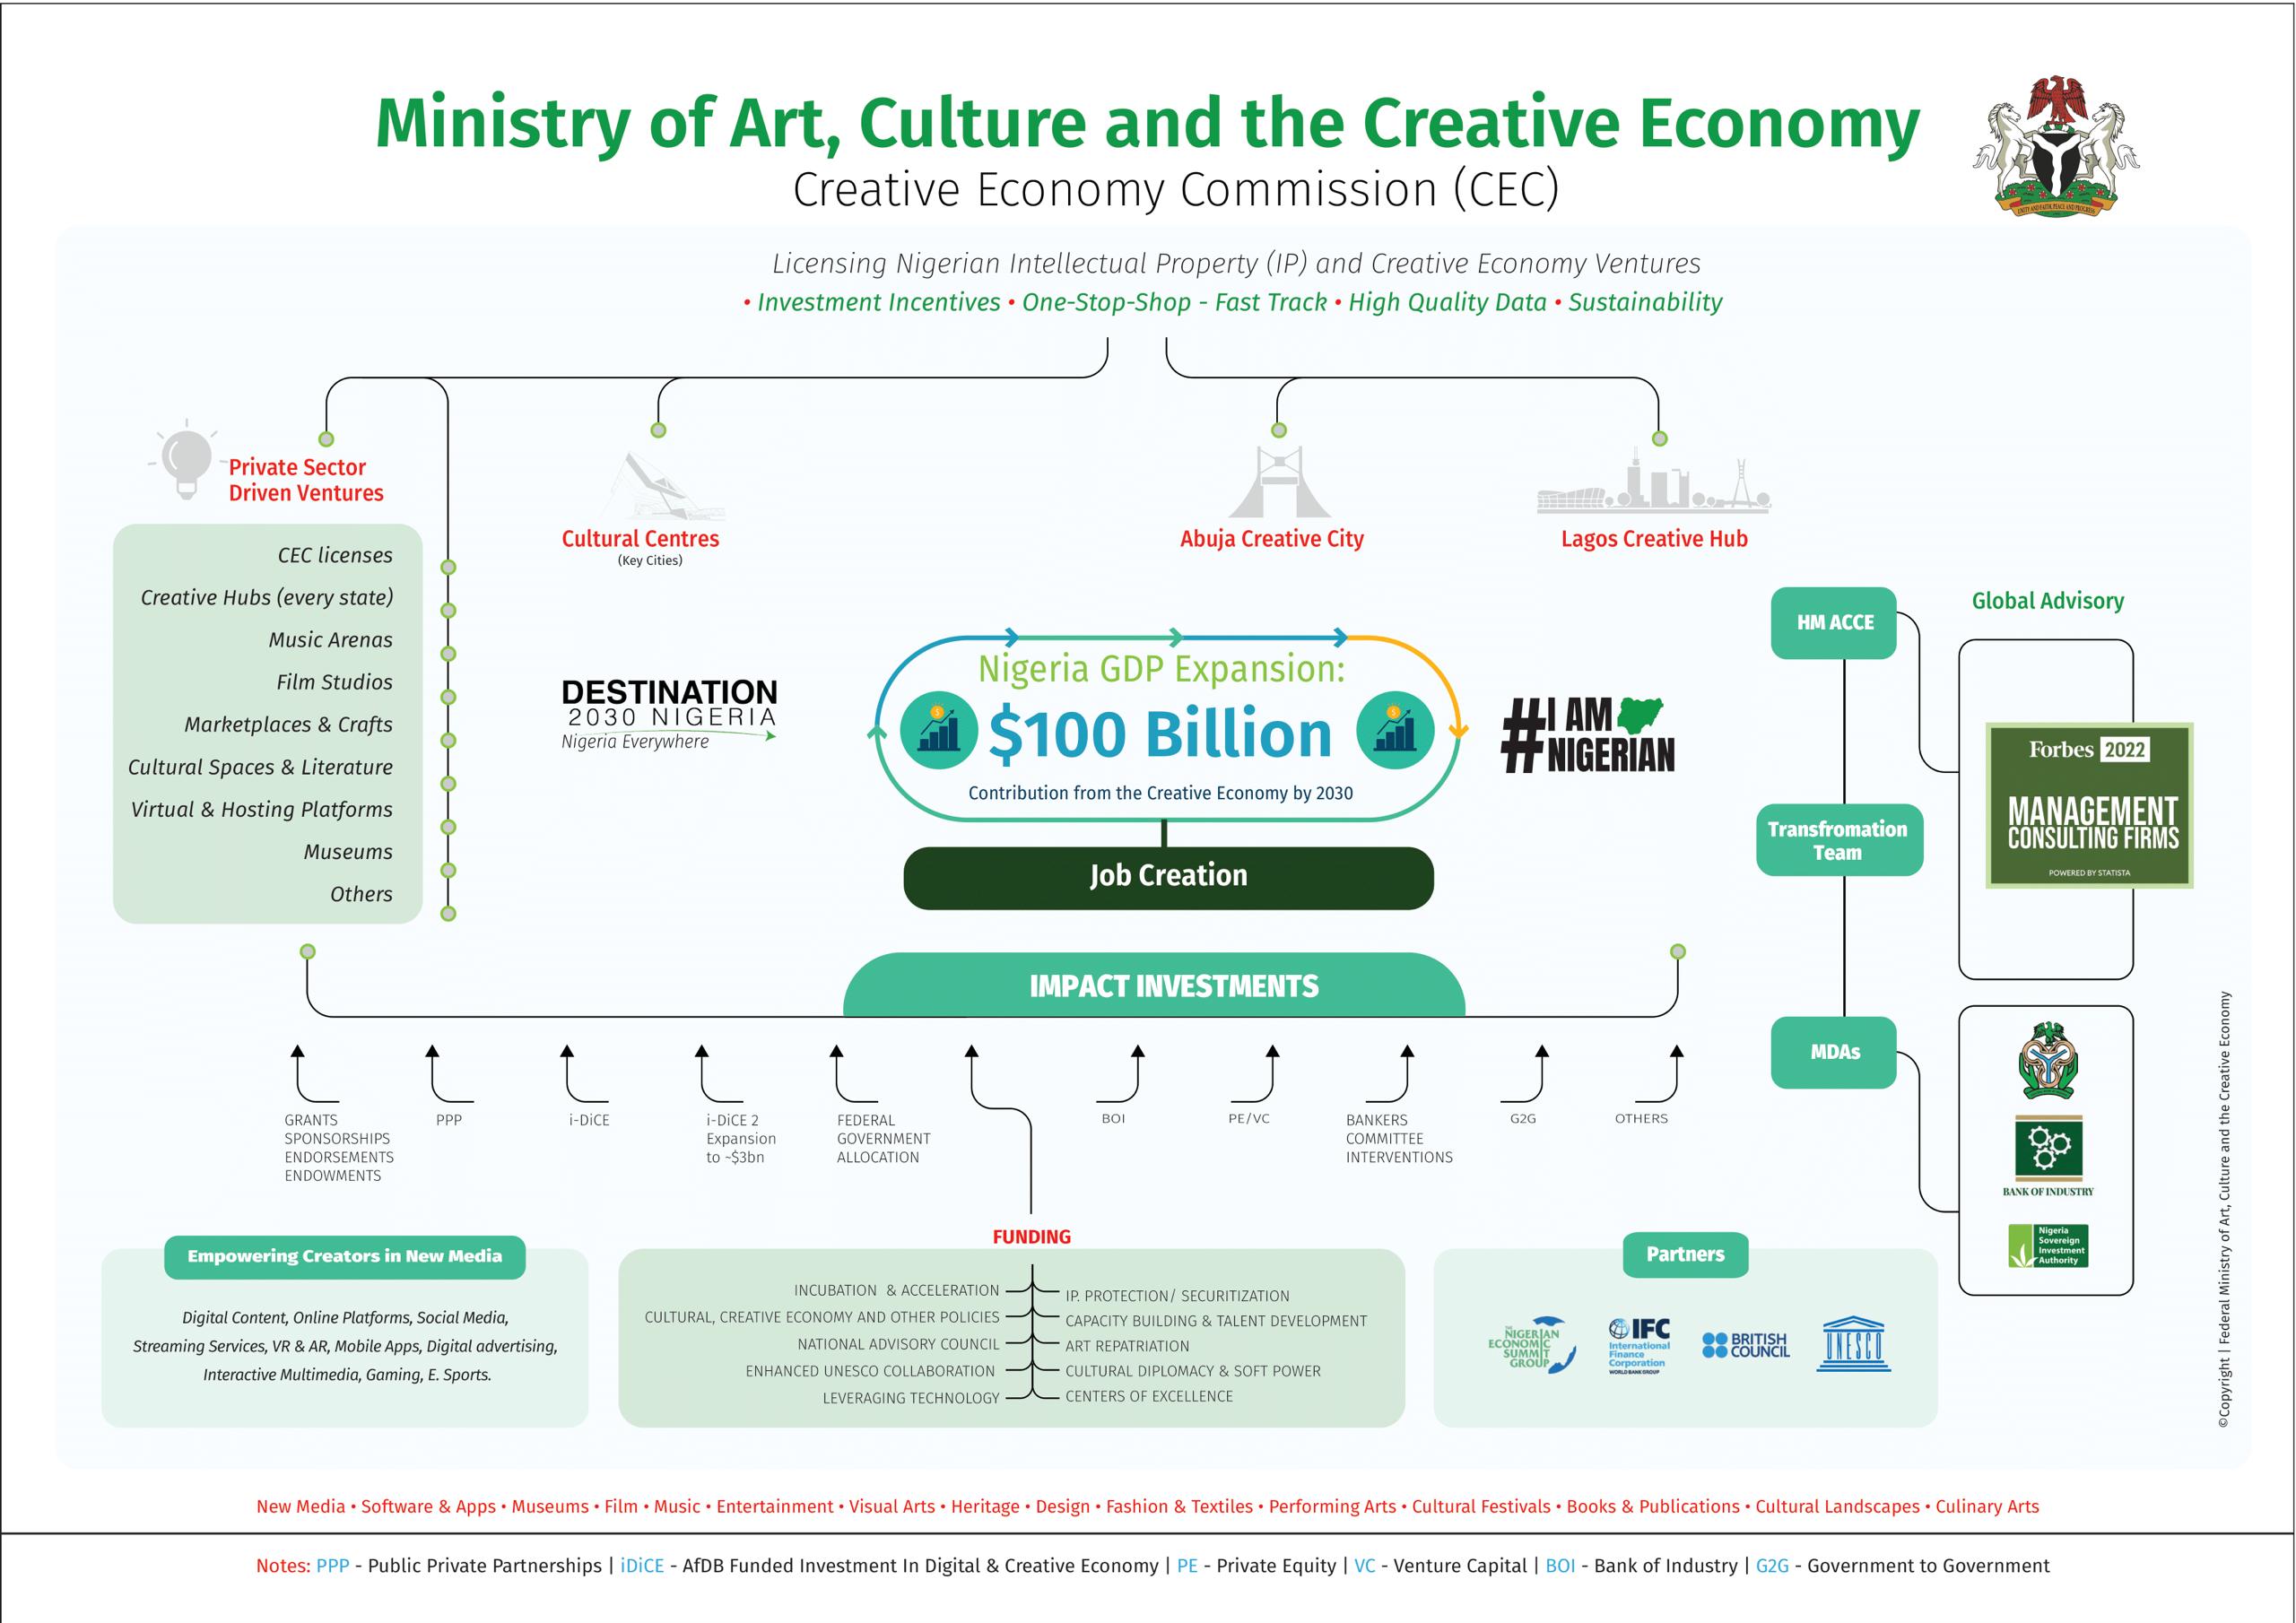 FG Aims to Grow Creative Economy to $100 Billion by 2030